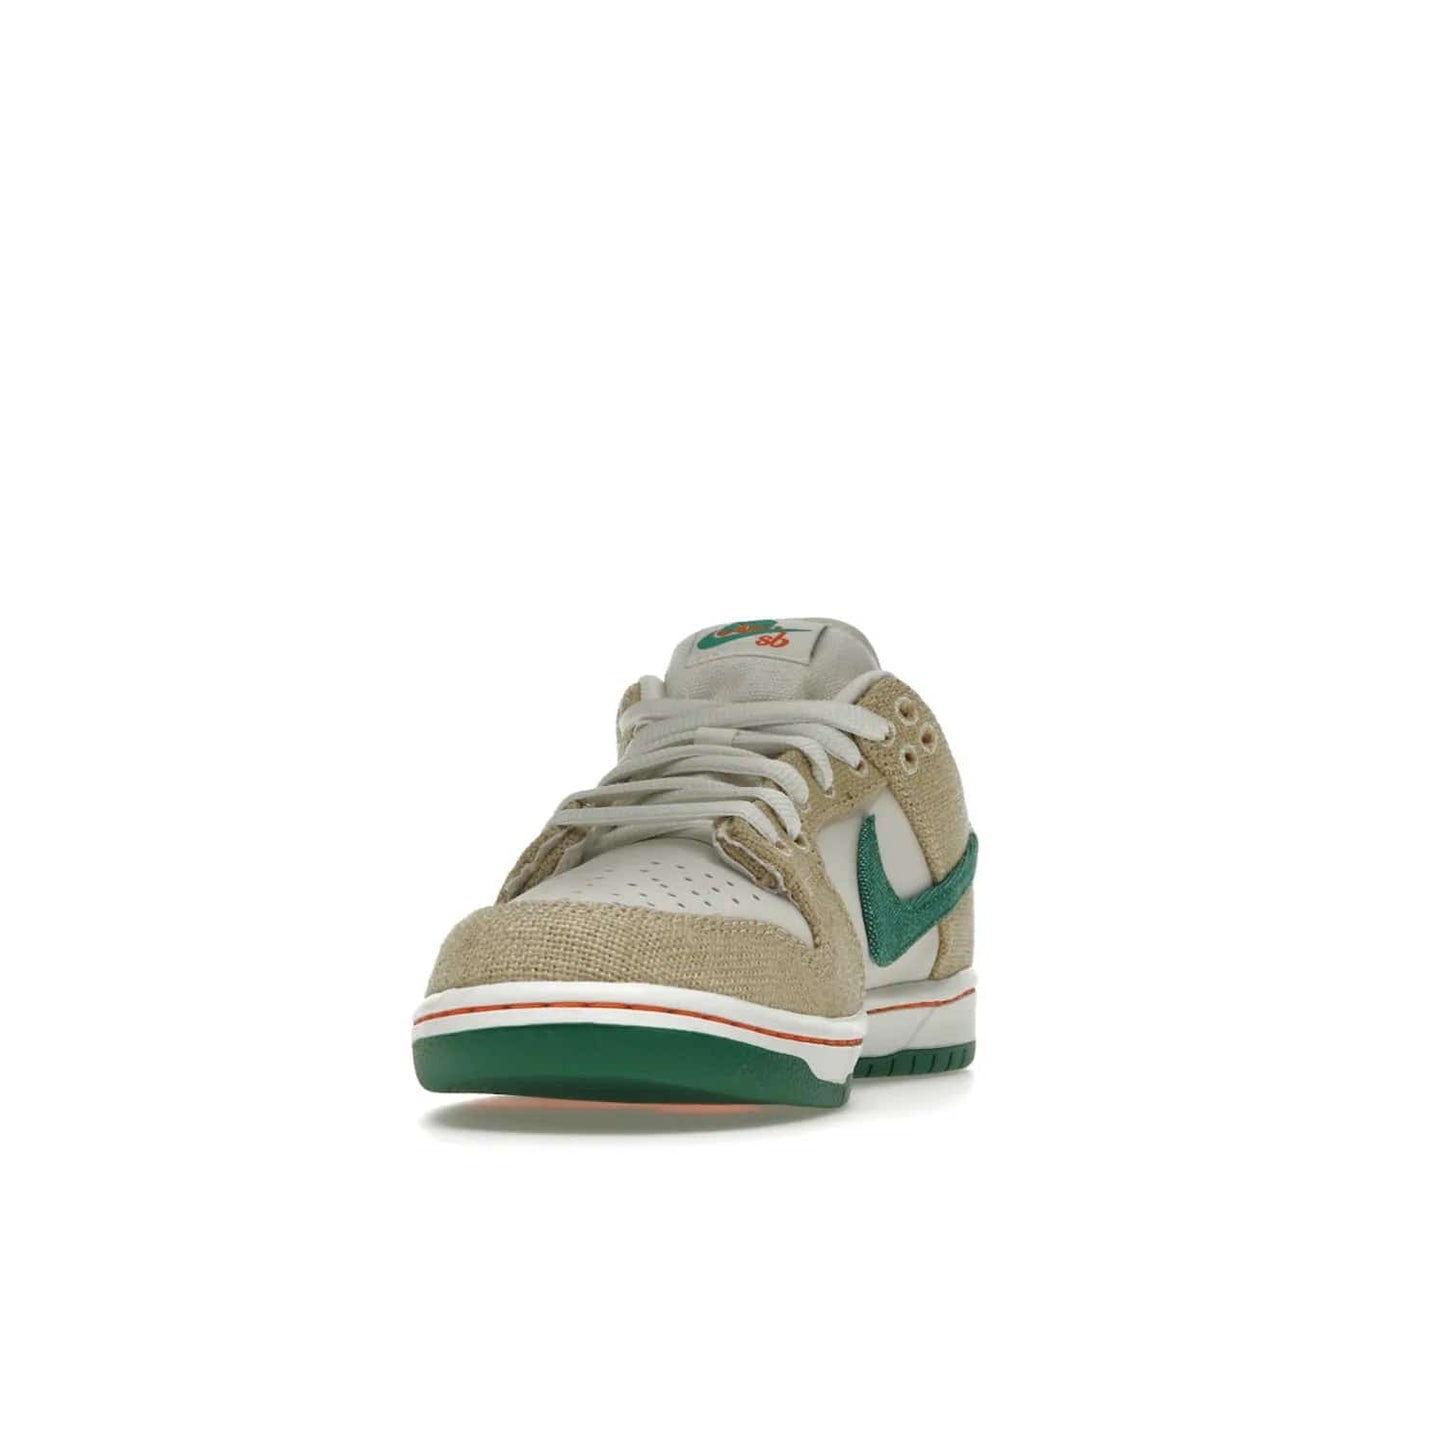 Nike SB Dunk Low Jarritos - Image 12 - Only at www.BallersClubKickz.com - Shop limited edition Nike SB Dunk Low Jarritos! Crafted with white leather and tear-away canvas materials with green accents. Includes orange, green, and white laces to customize your look. Available now.